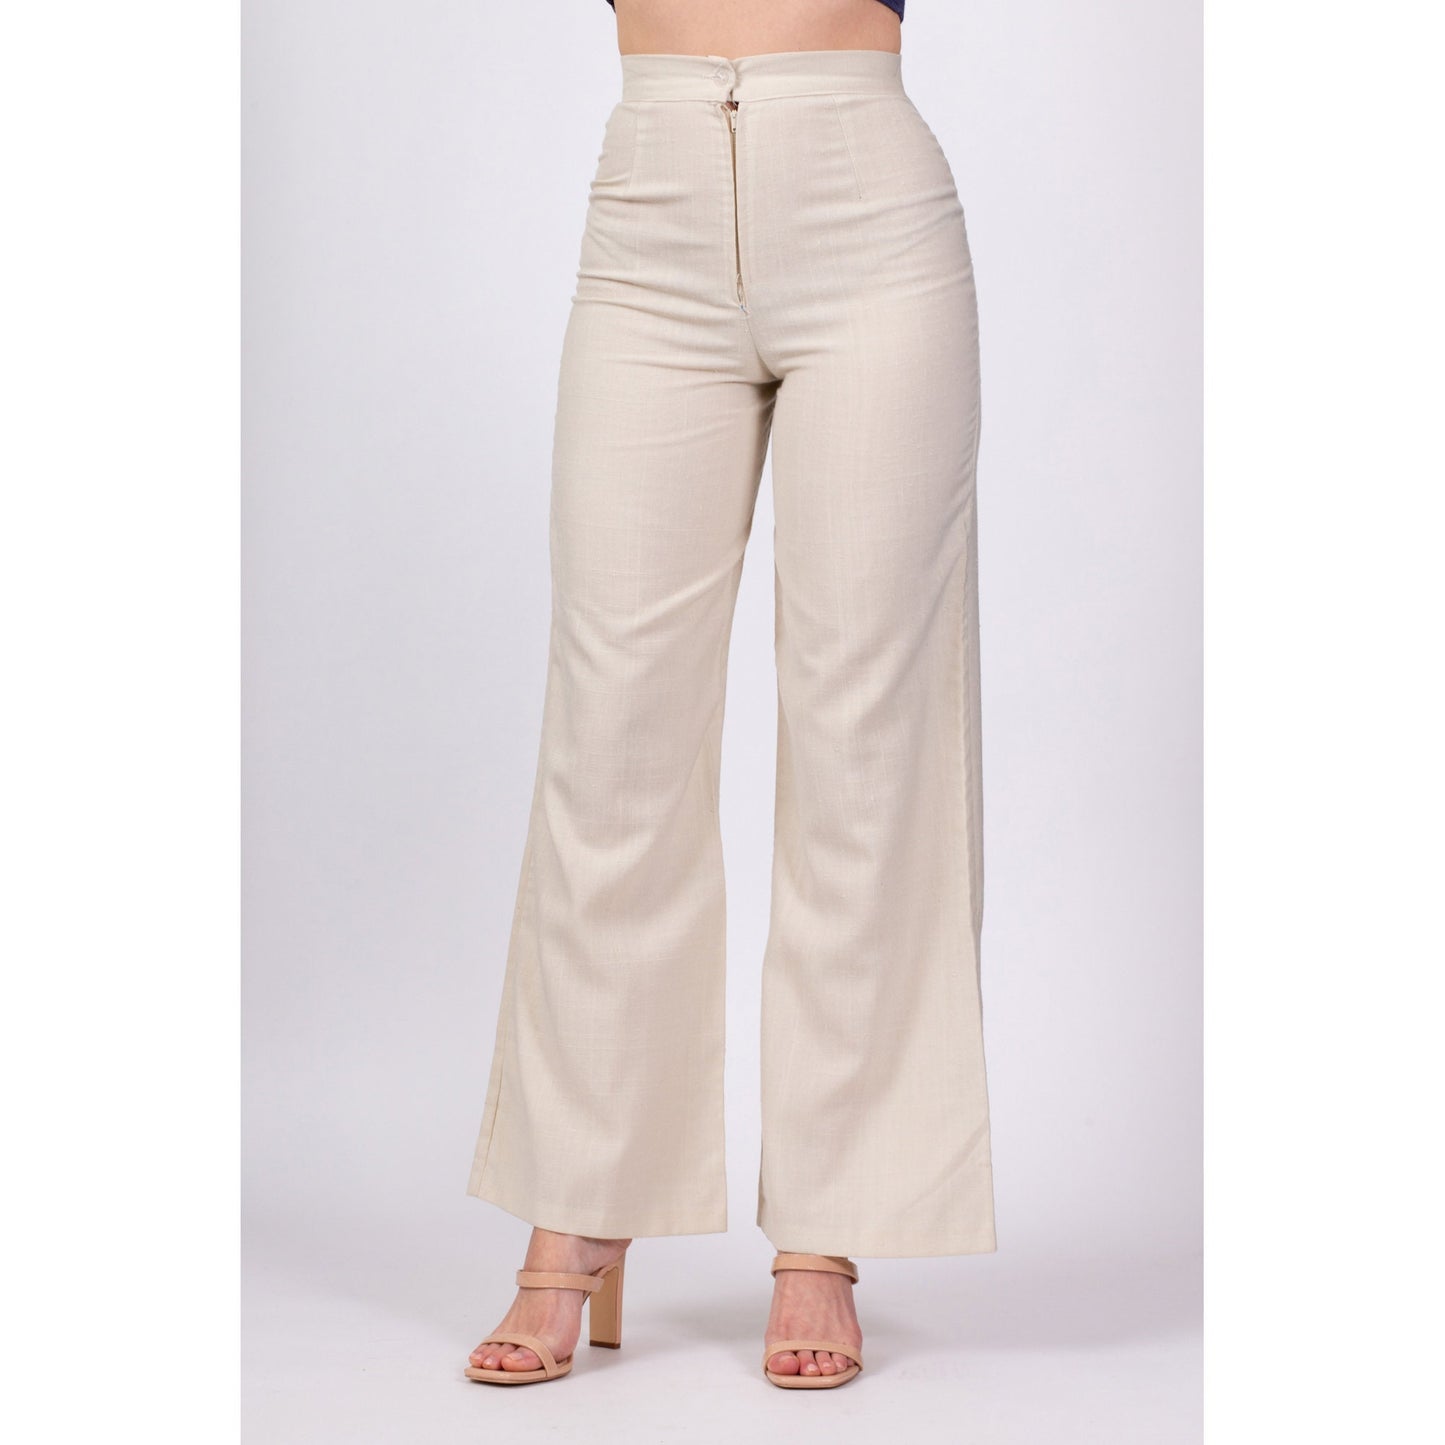 70s Off-White High Waisted Pants - Extra Small, 25" 